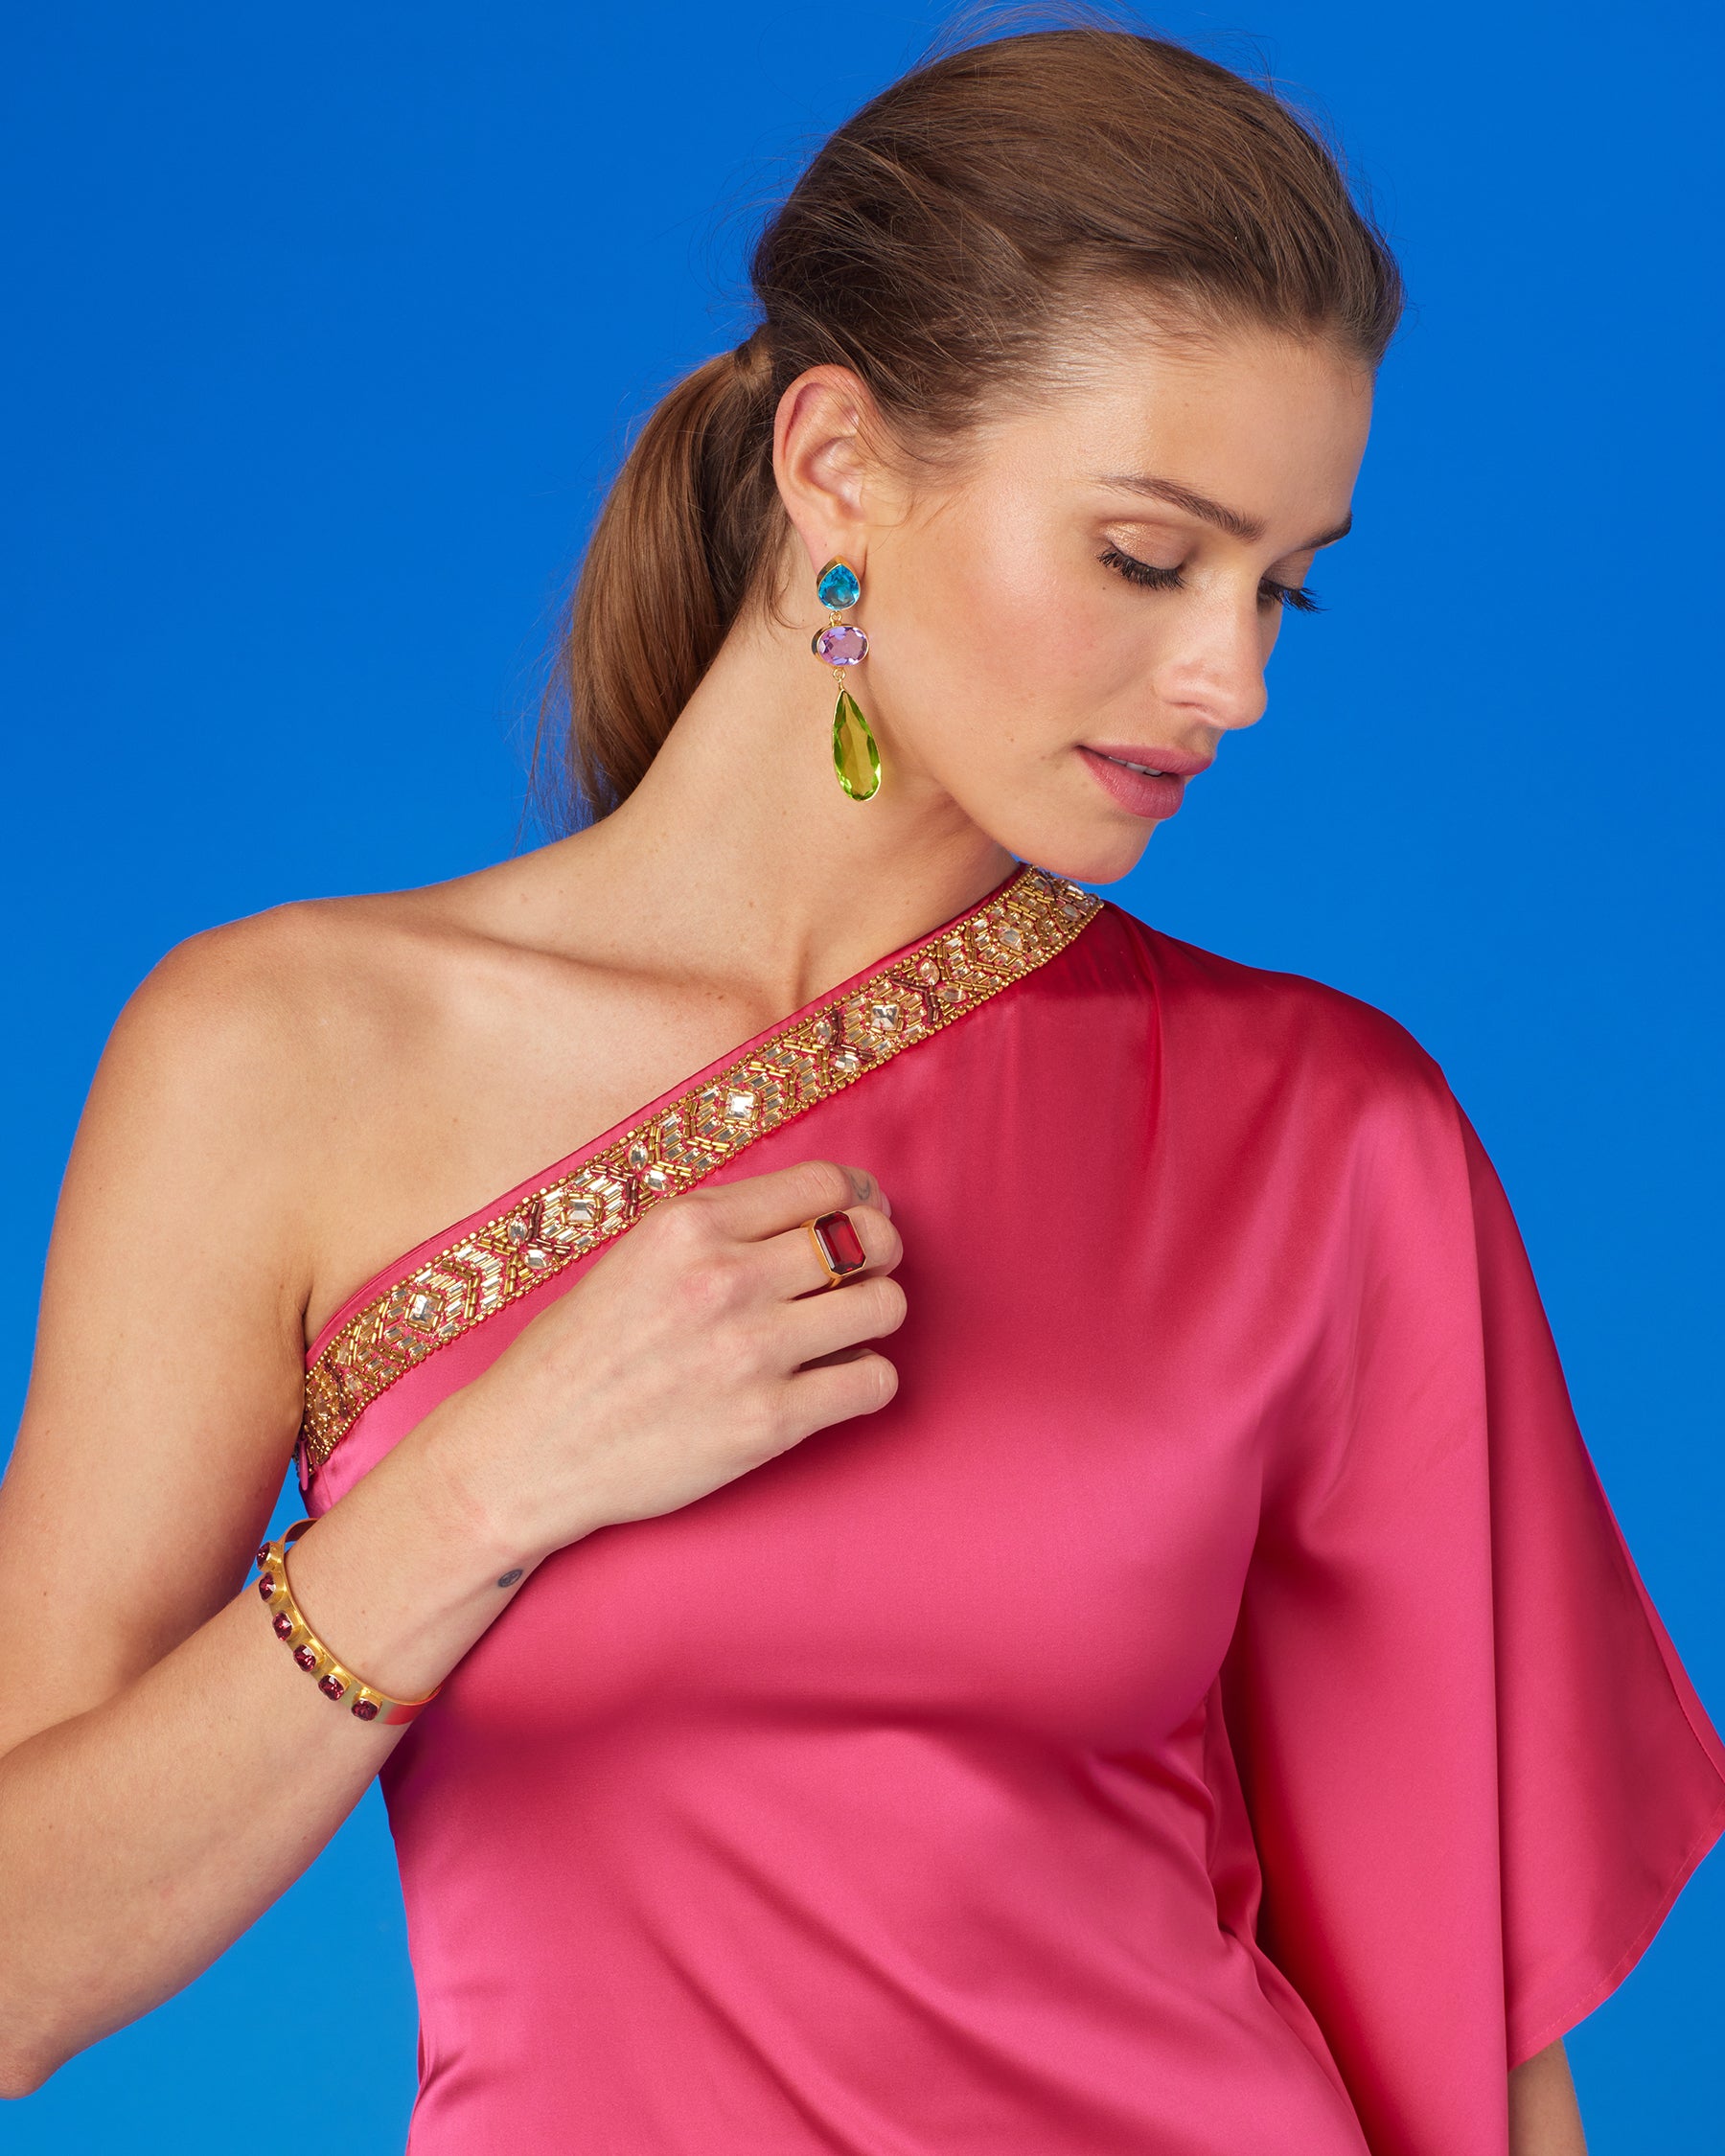 Regency Statement Ring in Ruby Red-Worn with the Isadora One Shoulder Fitted Maxi Dress with Embellishment